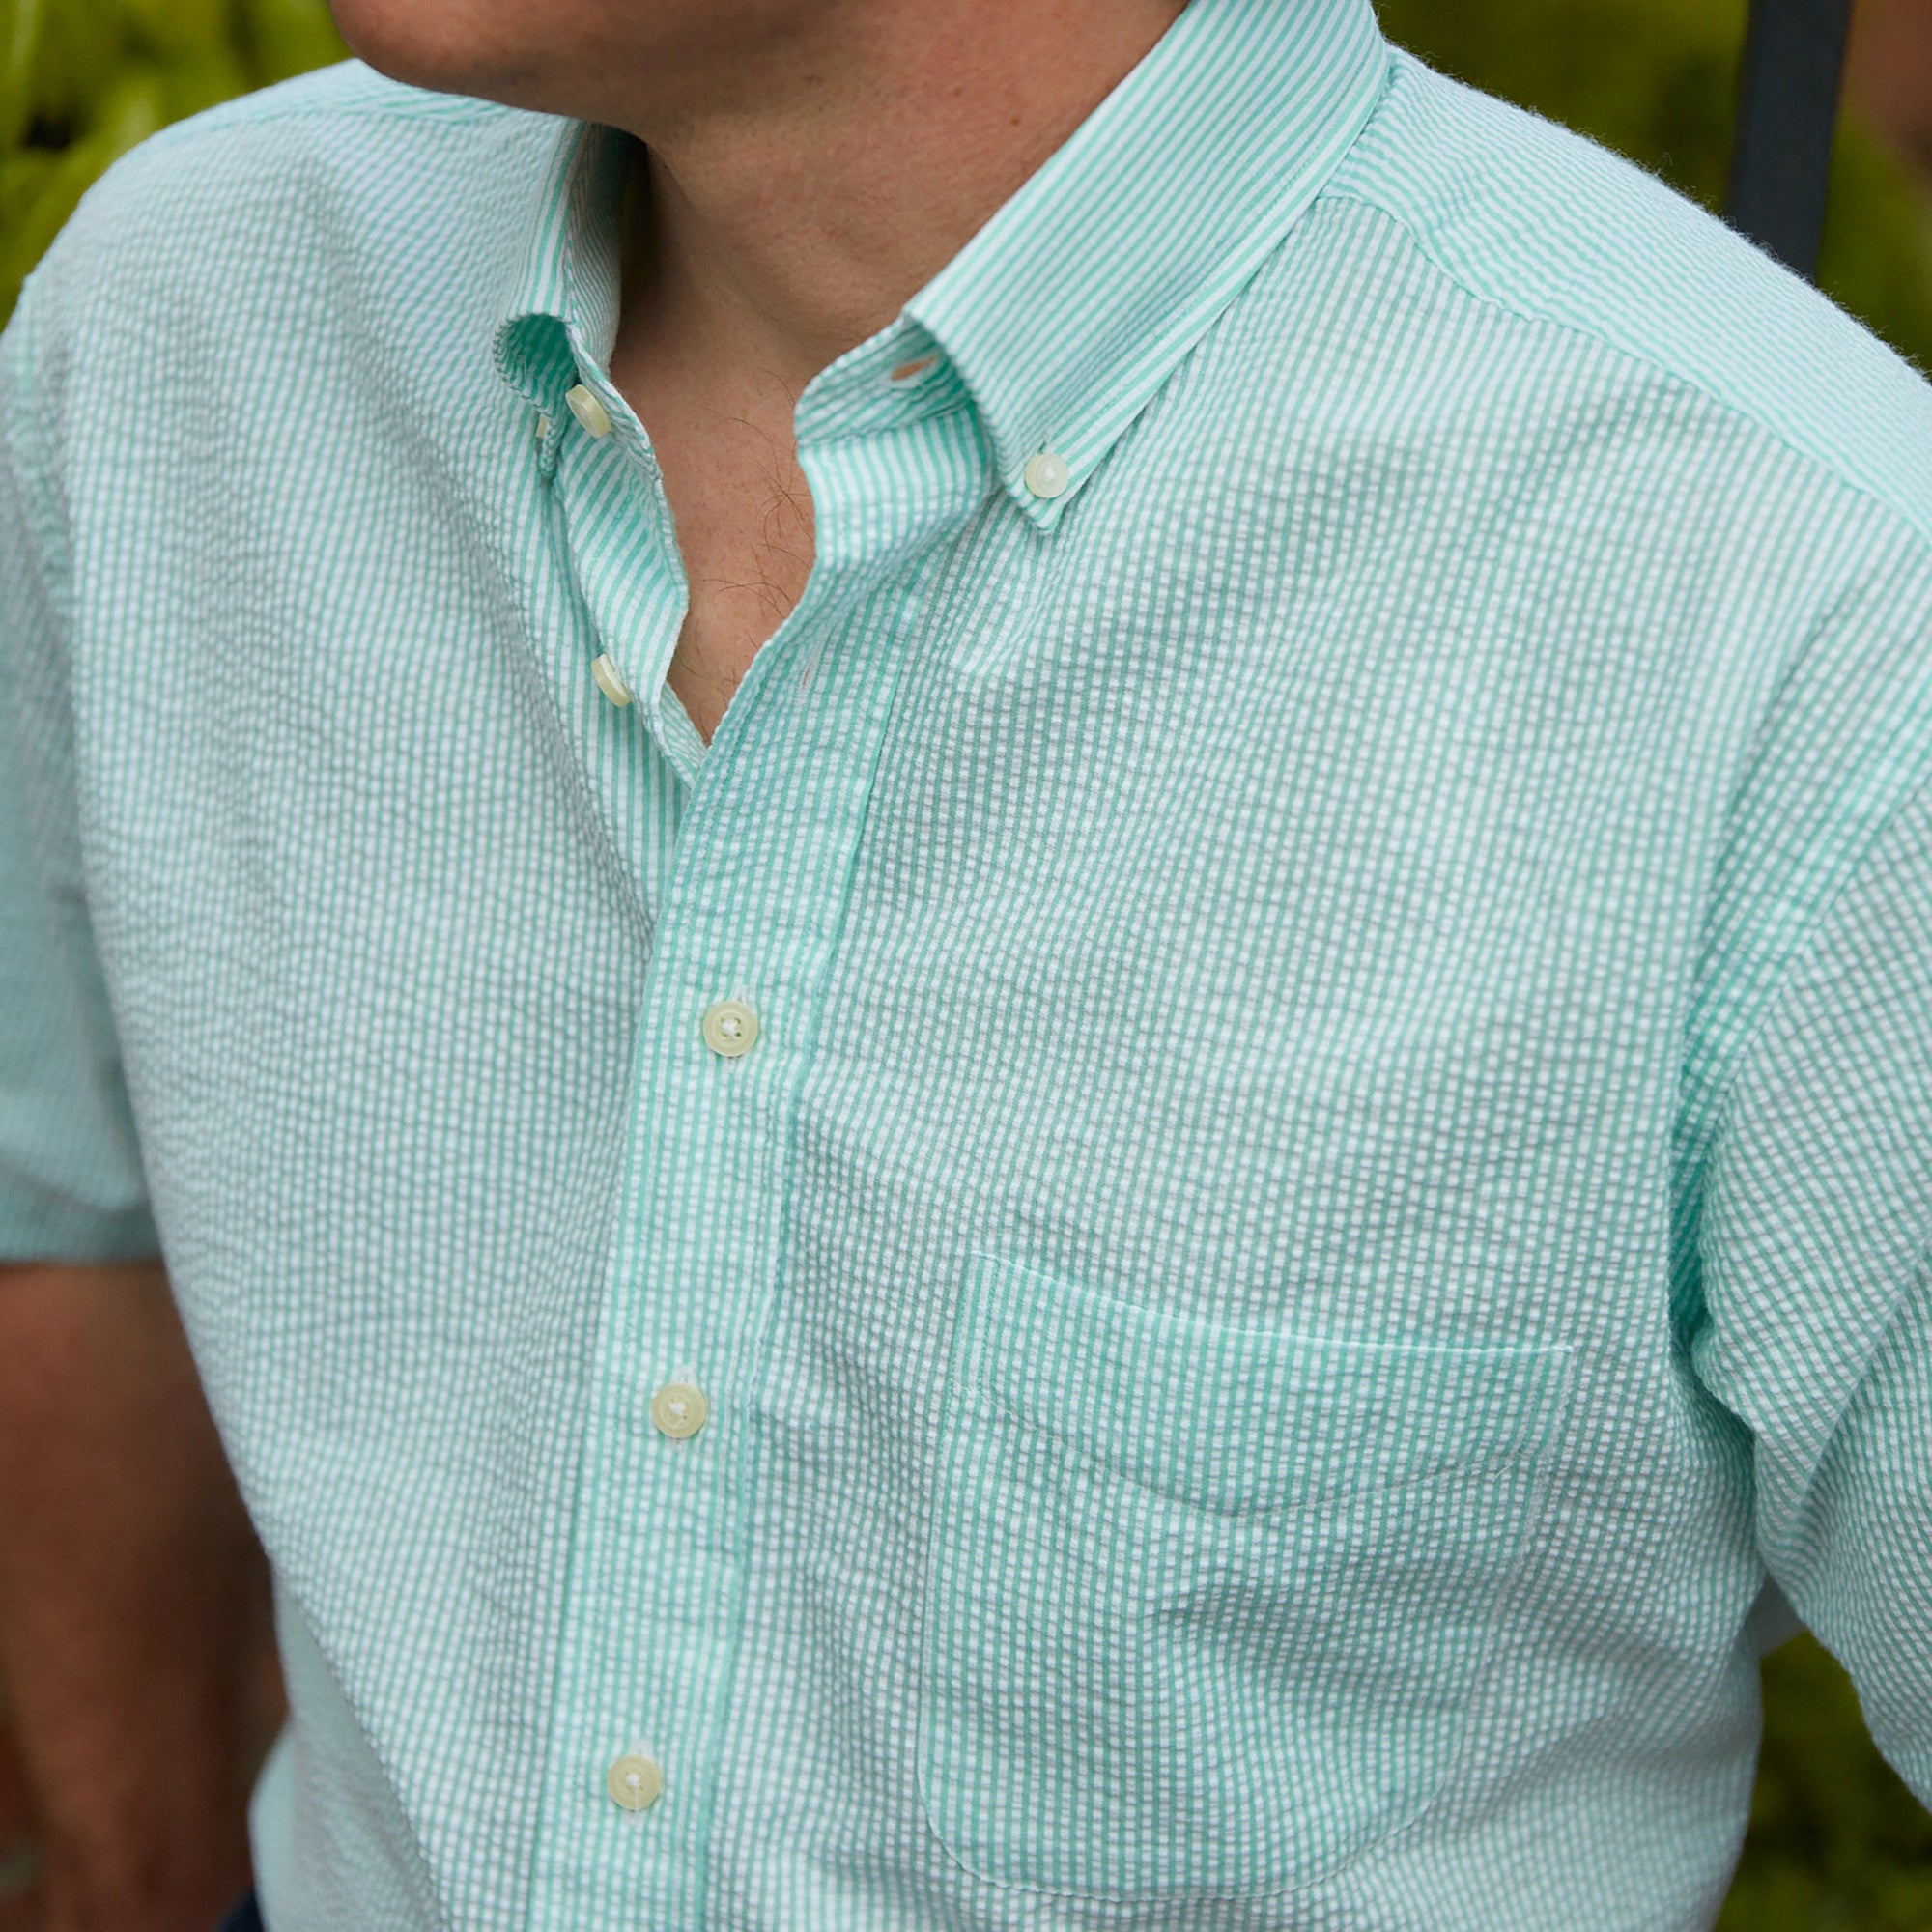 Seersucker all year long in a minty green seersucker shirt. Subtle, lightweight, and a texture they begs a second look.  100% Cotton Seersucker • Spread Collar • Short Sleeve • Chest Pocket • Machine Washable • Made in Italy